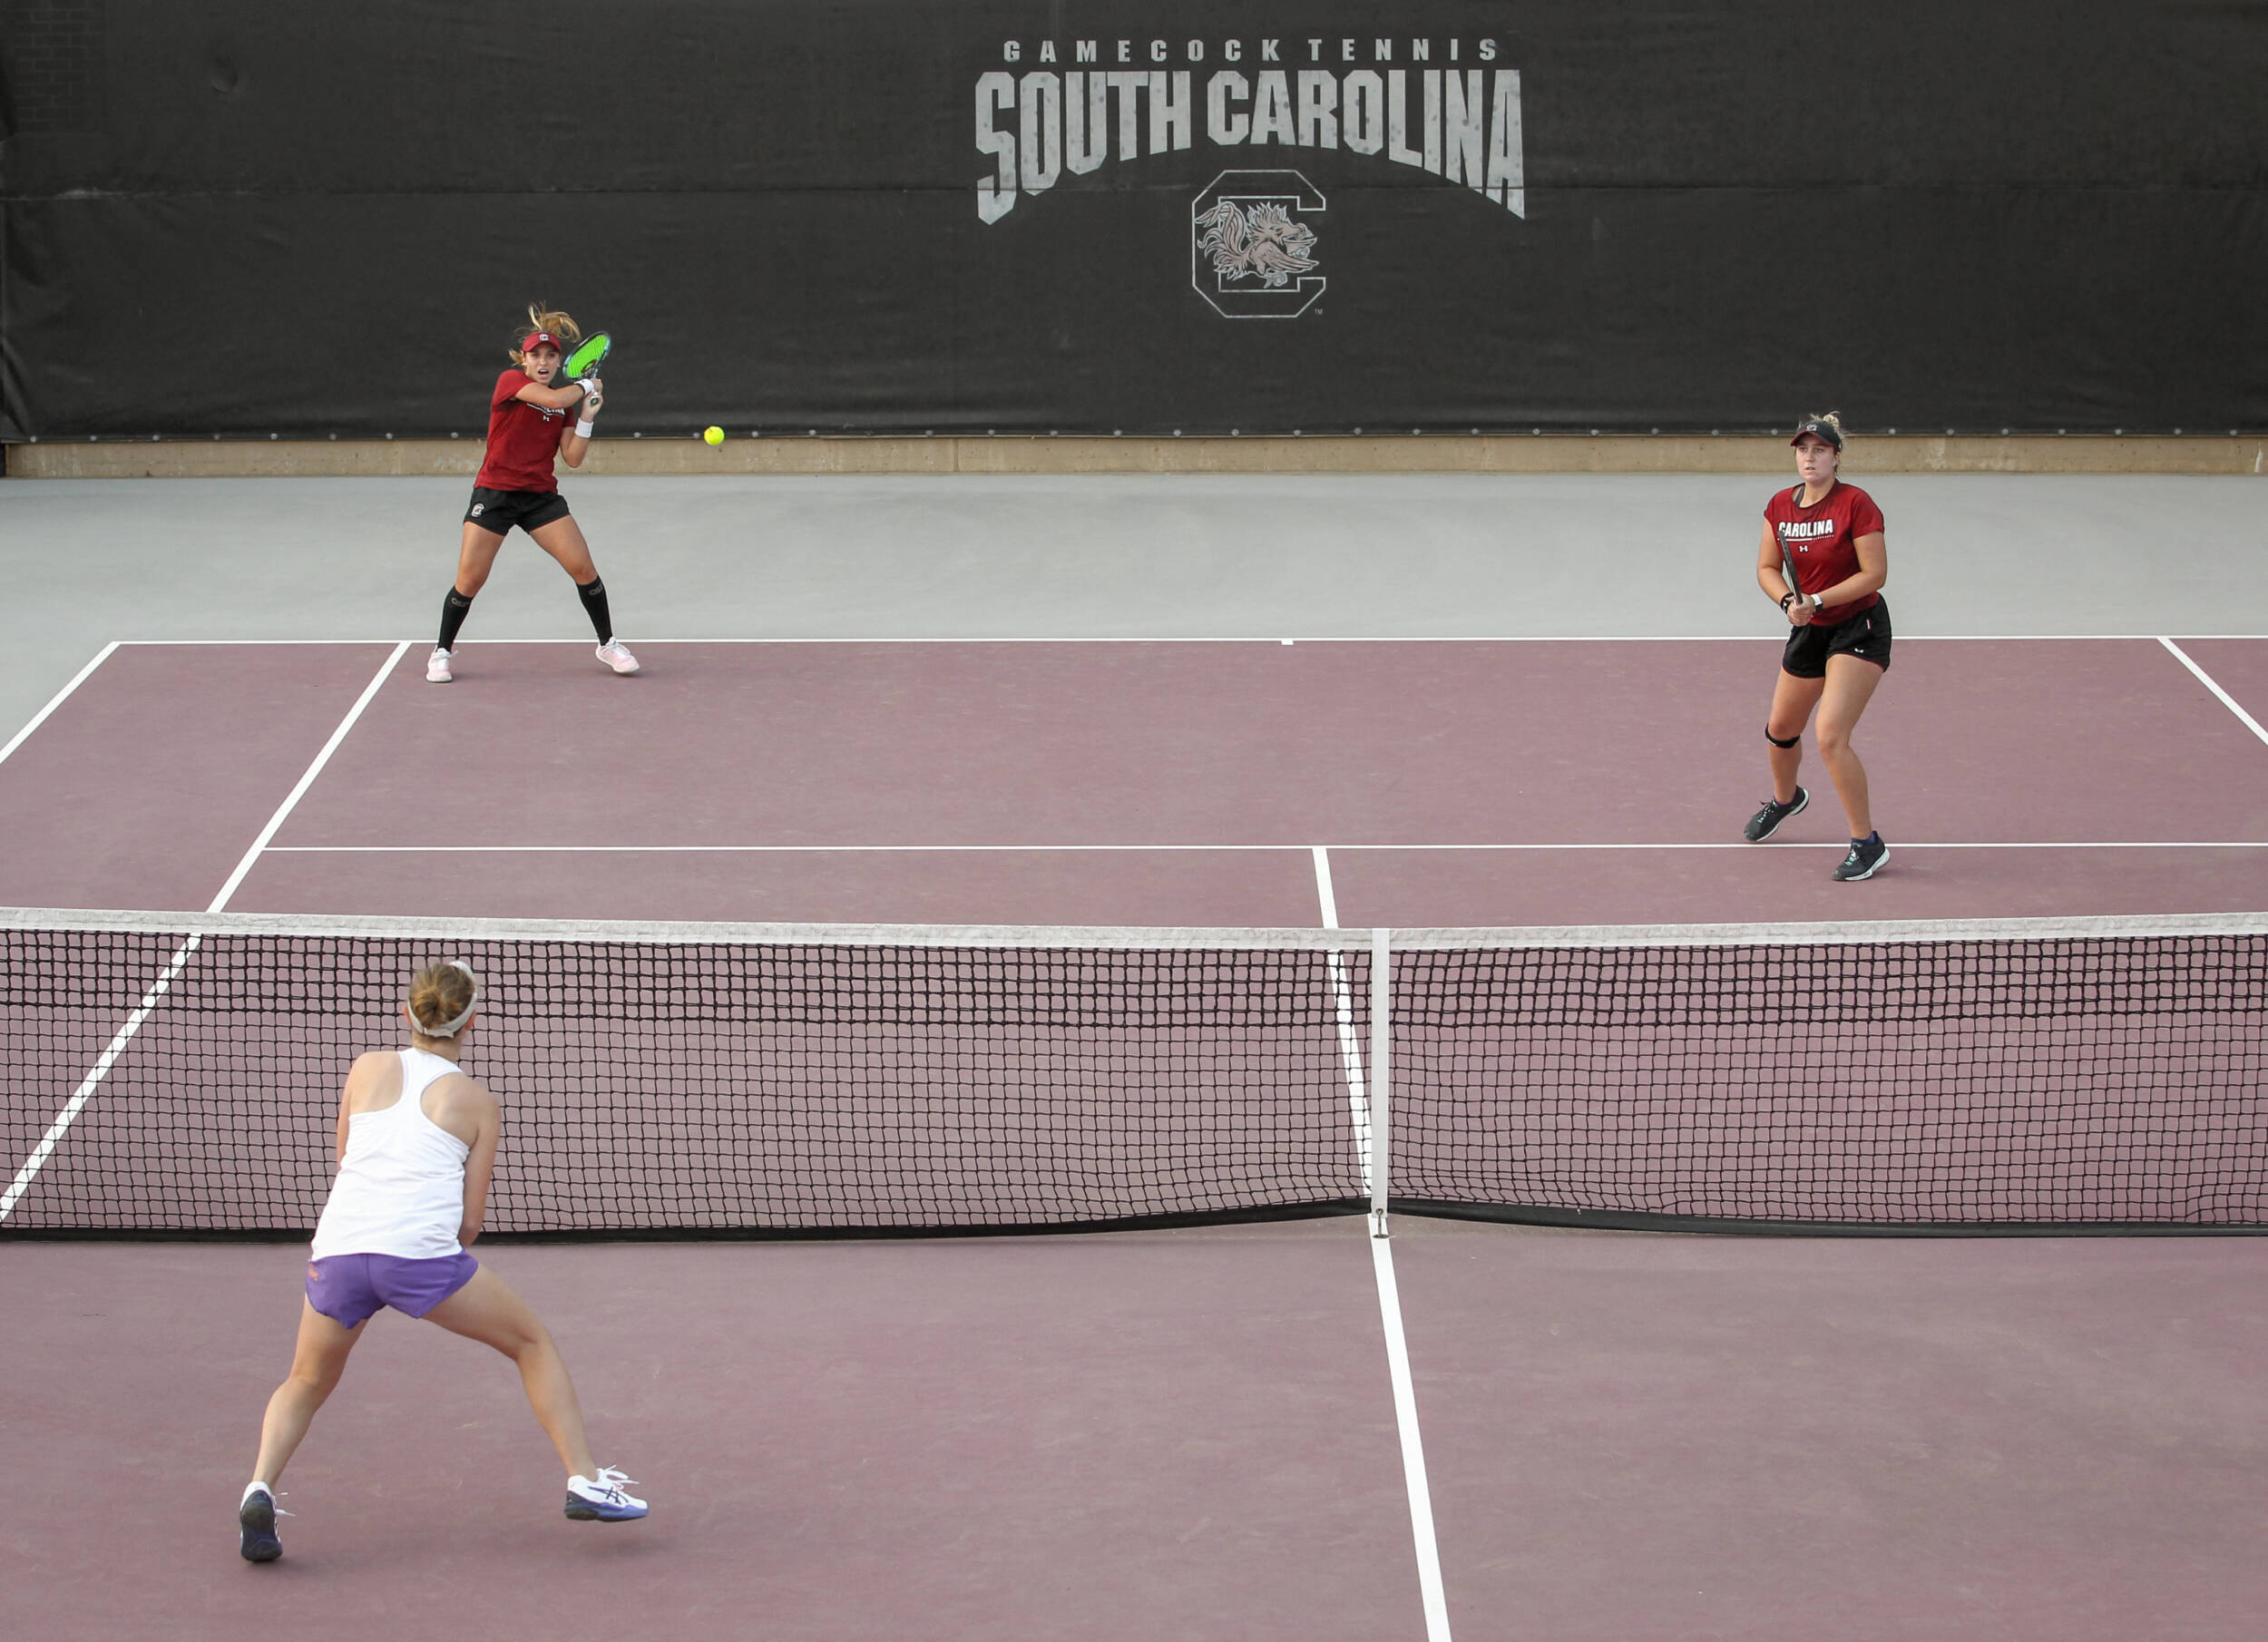 Gamecocks Take Doubles Point in Loss at Tennessee